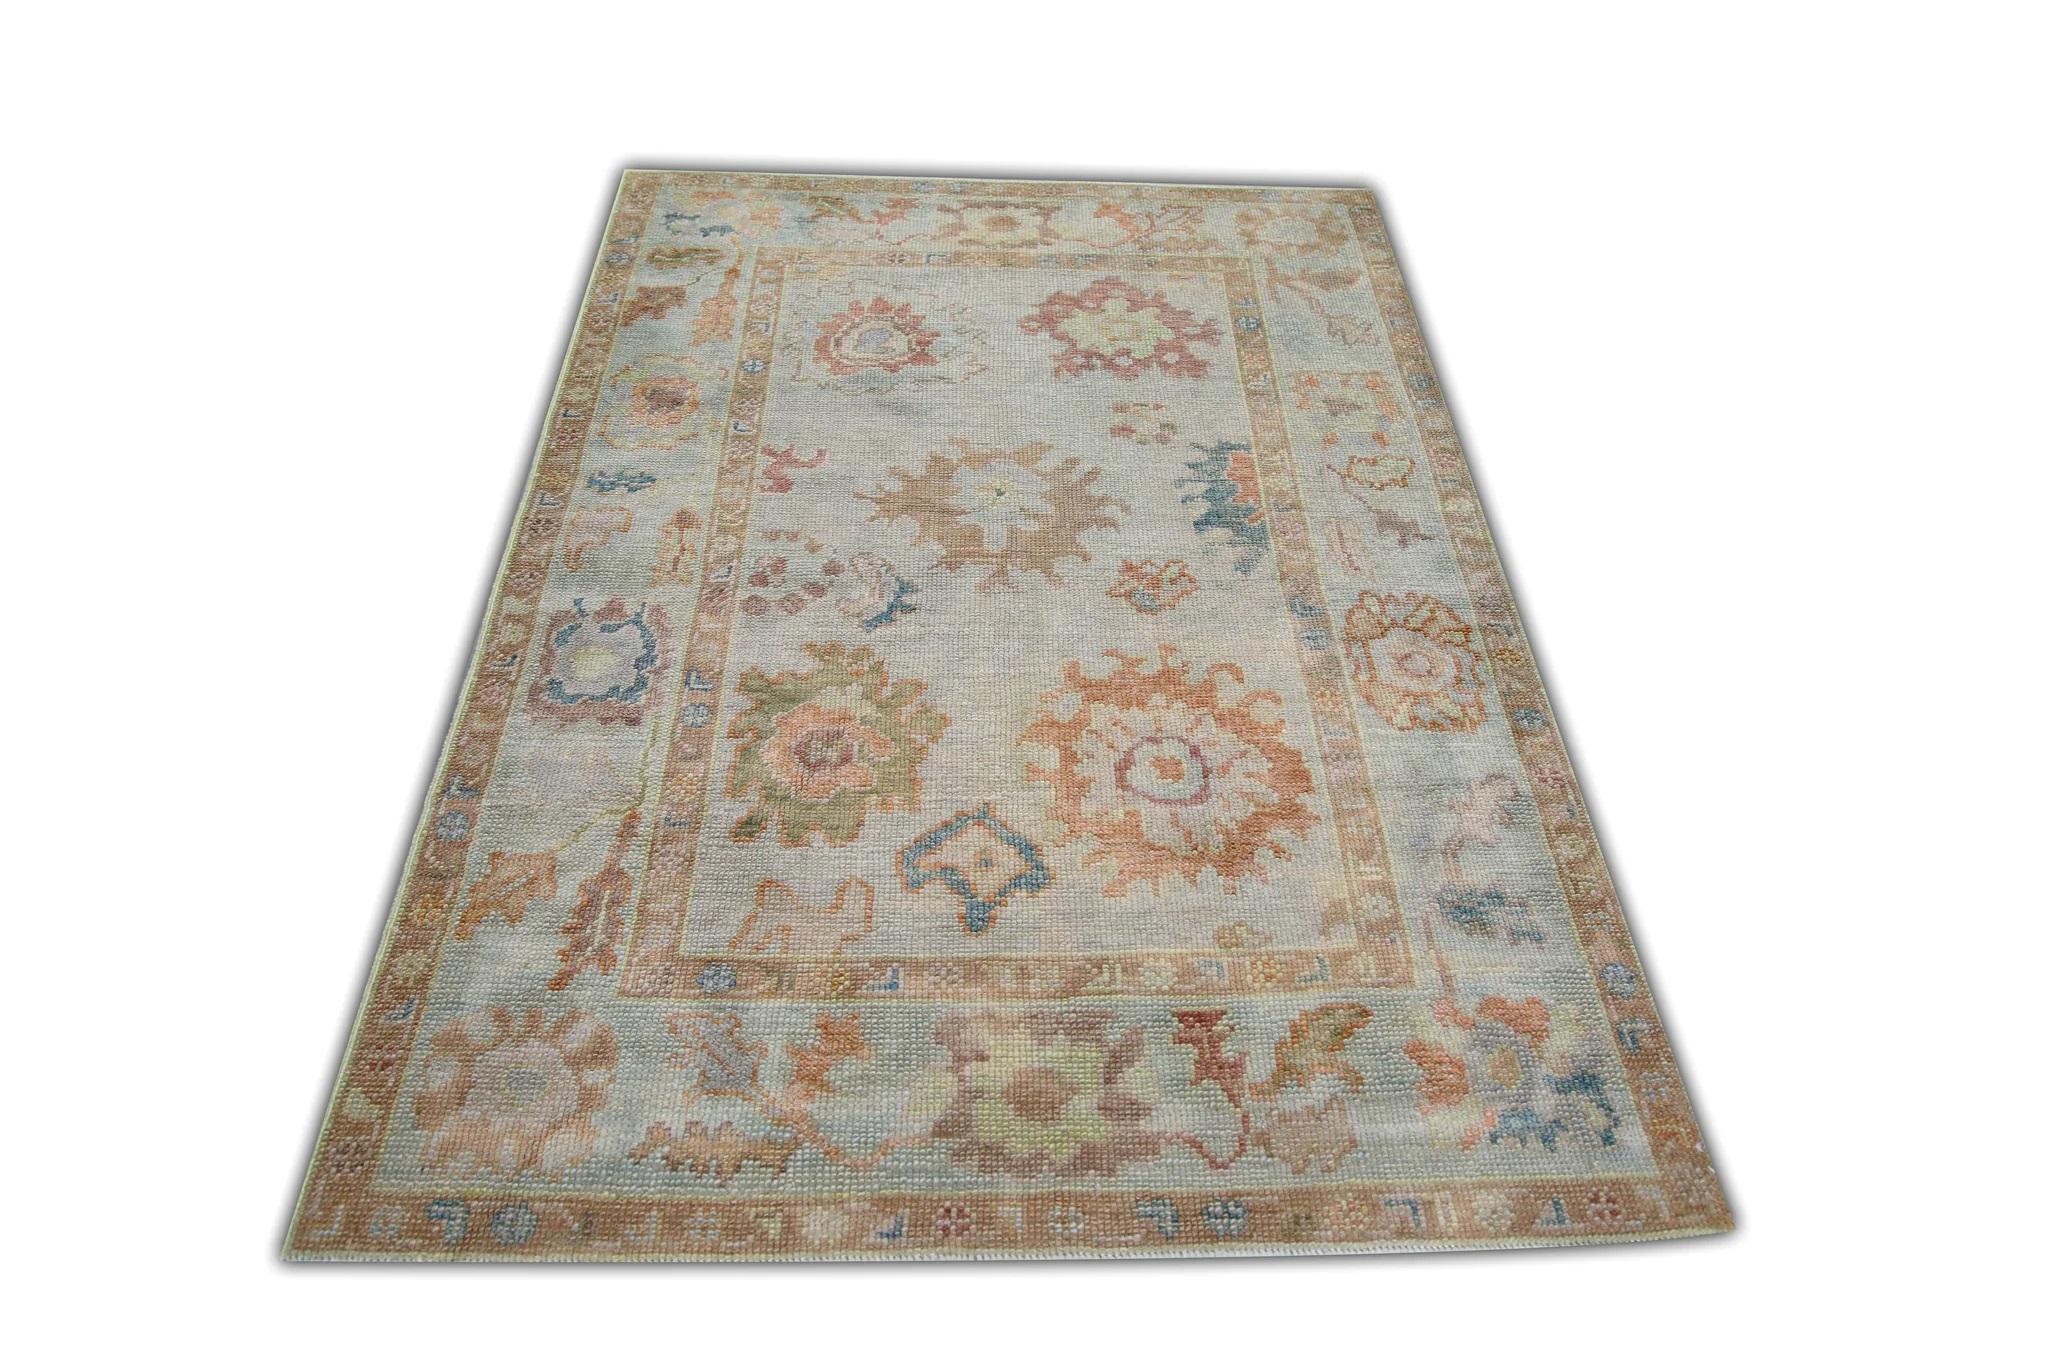 Contemporary Multicolor Floral Design Handwoven Wool Turkish Oushak Rug 3'11